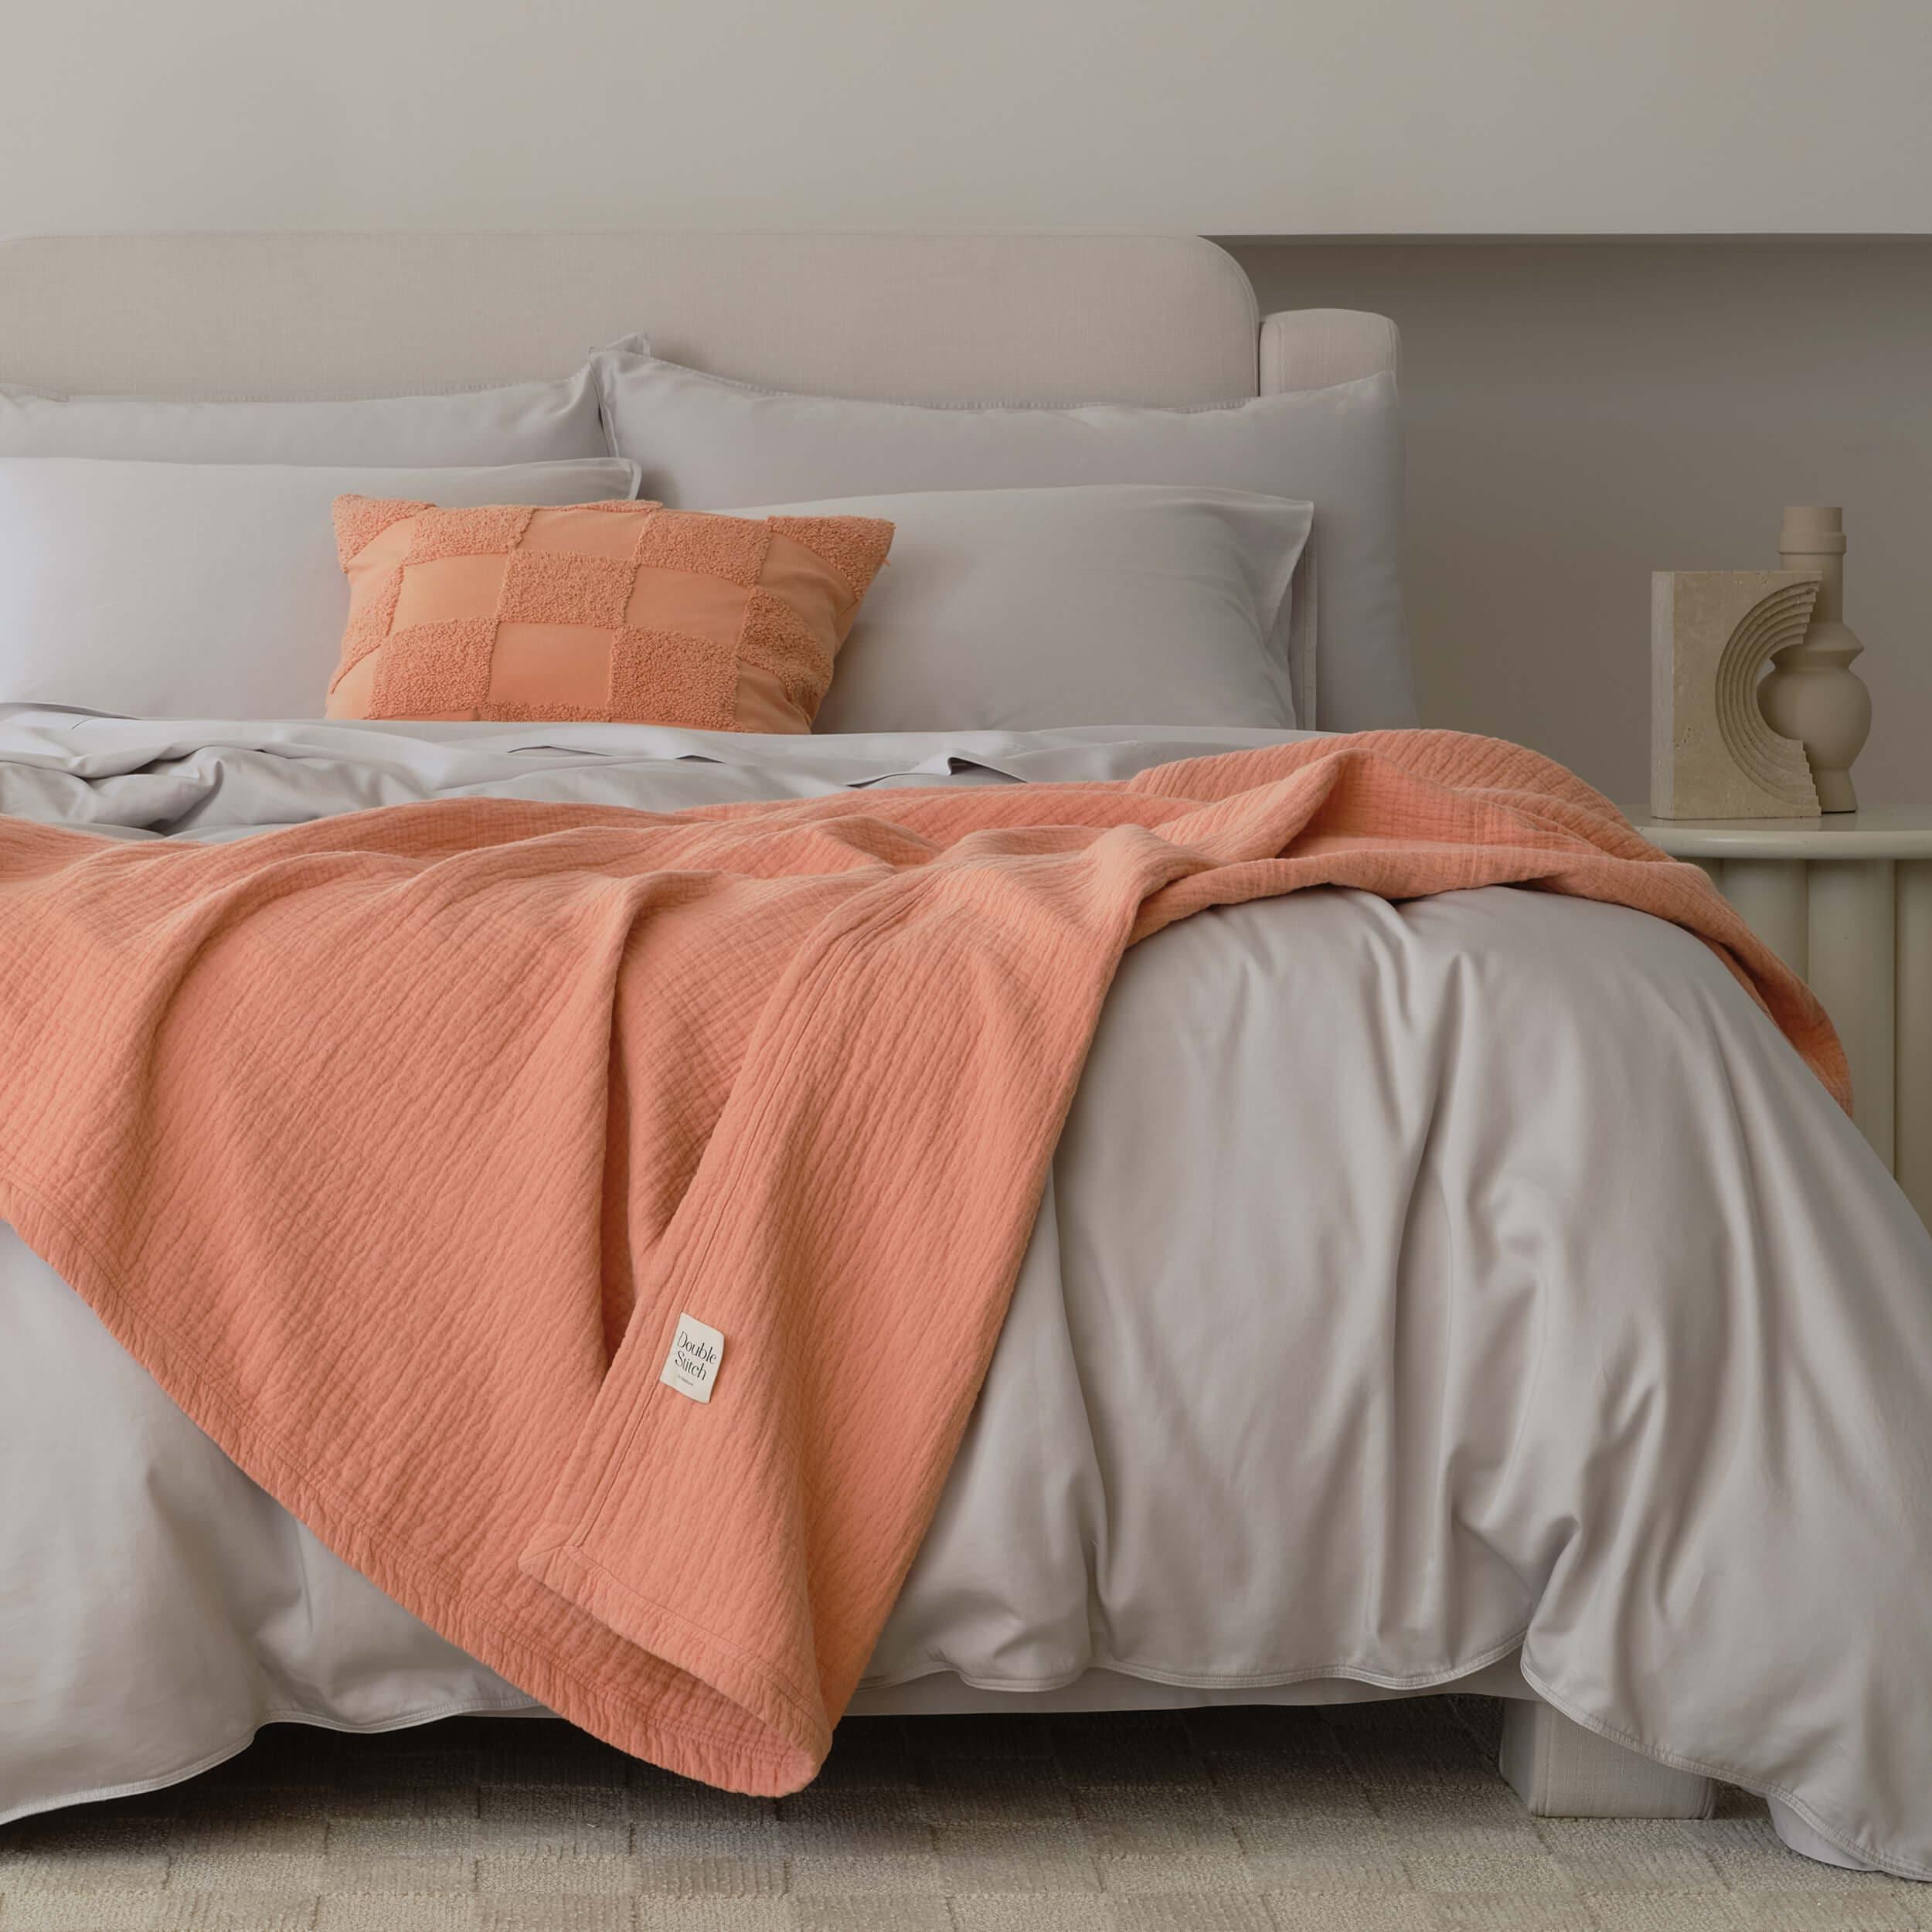 The modern throw blanket is a stylish accessory that can be draped over a chair or bed.